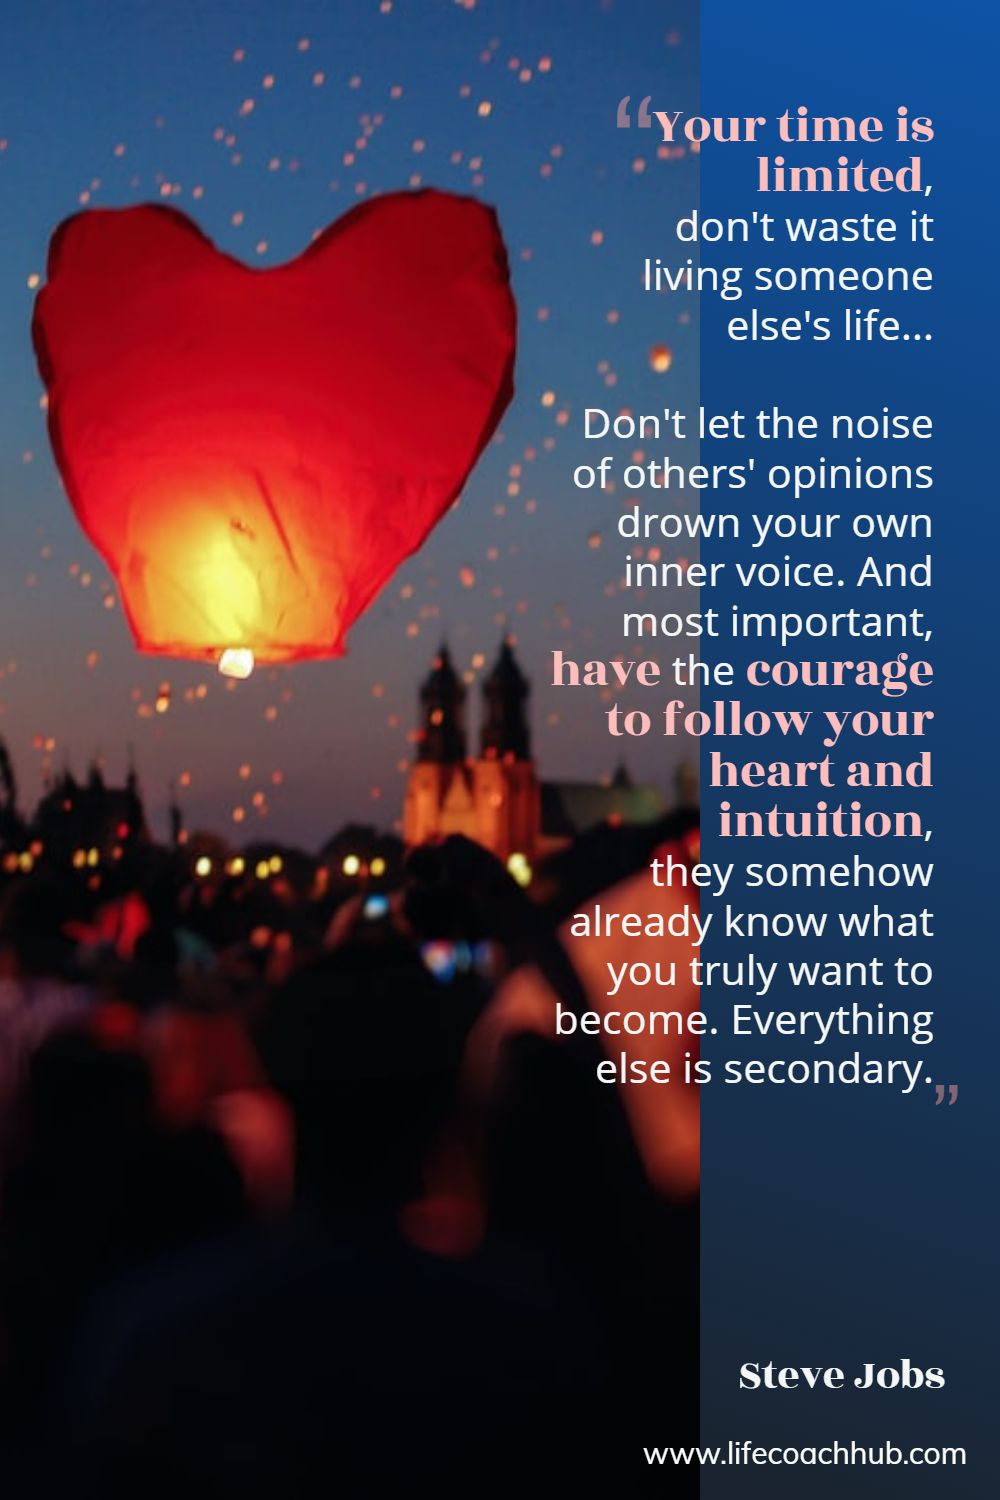 Your time is limited, don't waste it living someone else's life... Don't let the noise of others' opinions drown your own inner voice. And most important, have the courage to follow your heart and intuition, they somehow already know what you truly want to become. Everything else is secondary. Steve Jobs Coaching Quote